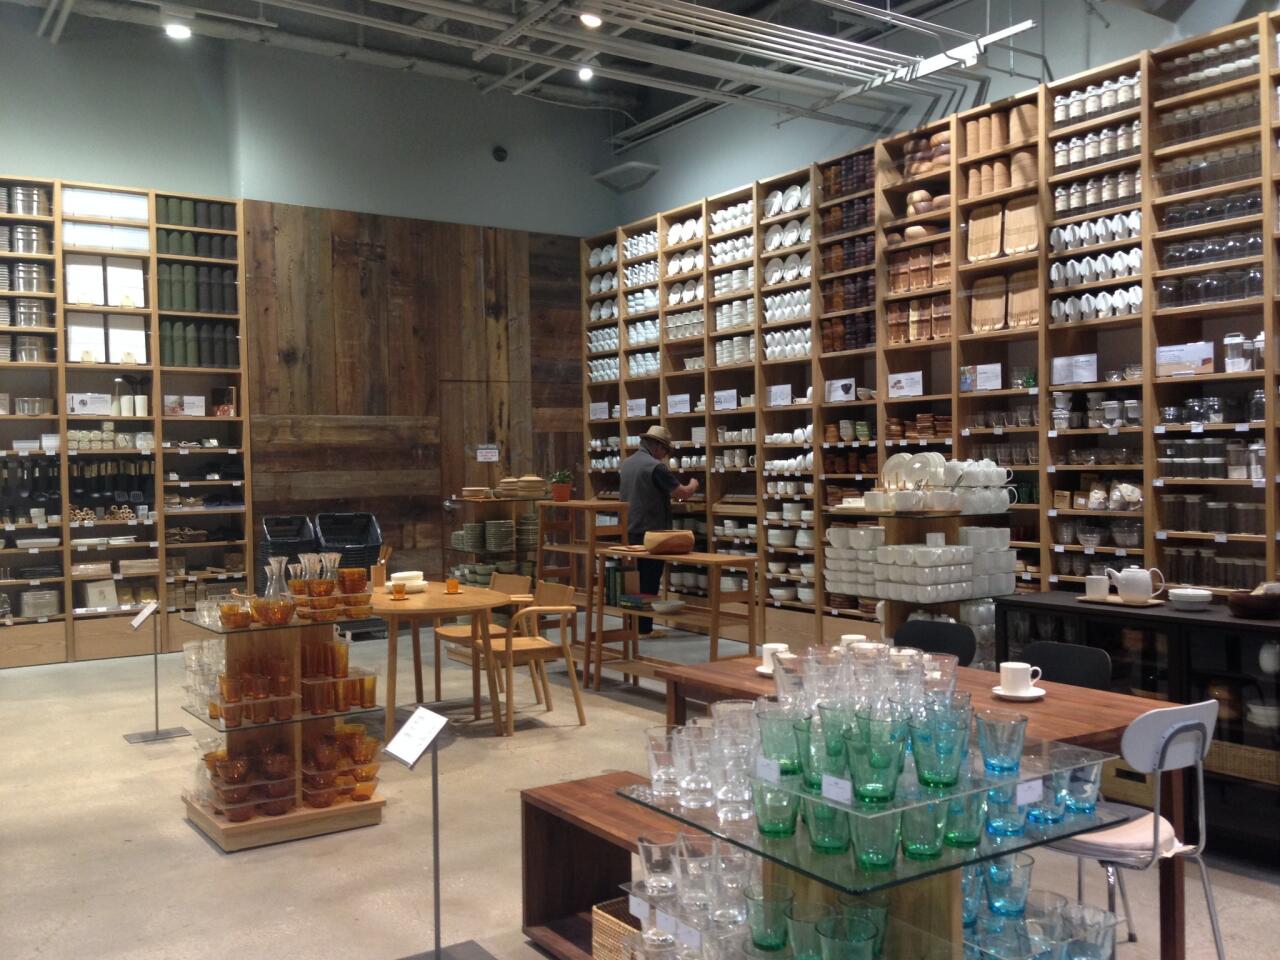 The kitchen and tableware section at the new Muji store in Hollywood.